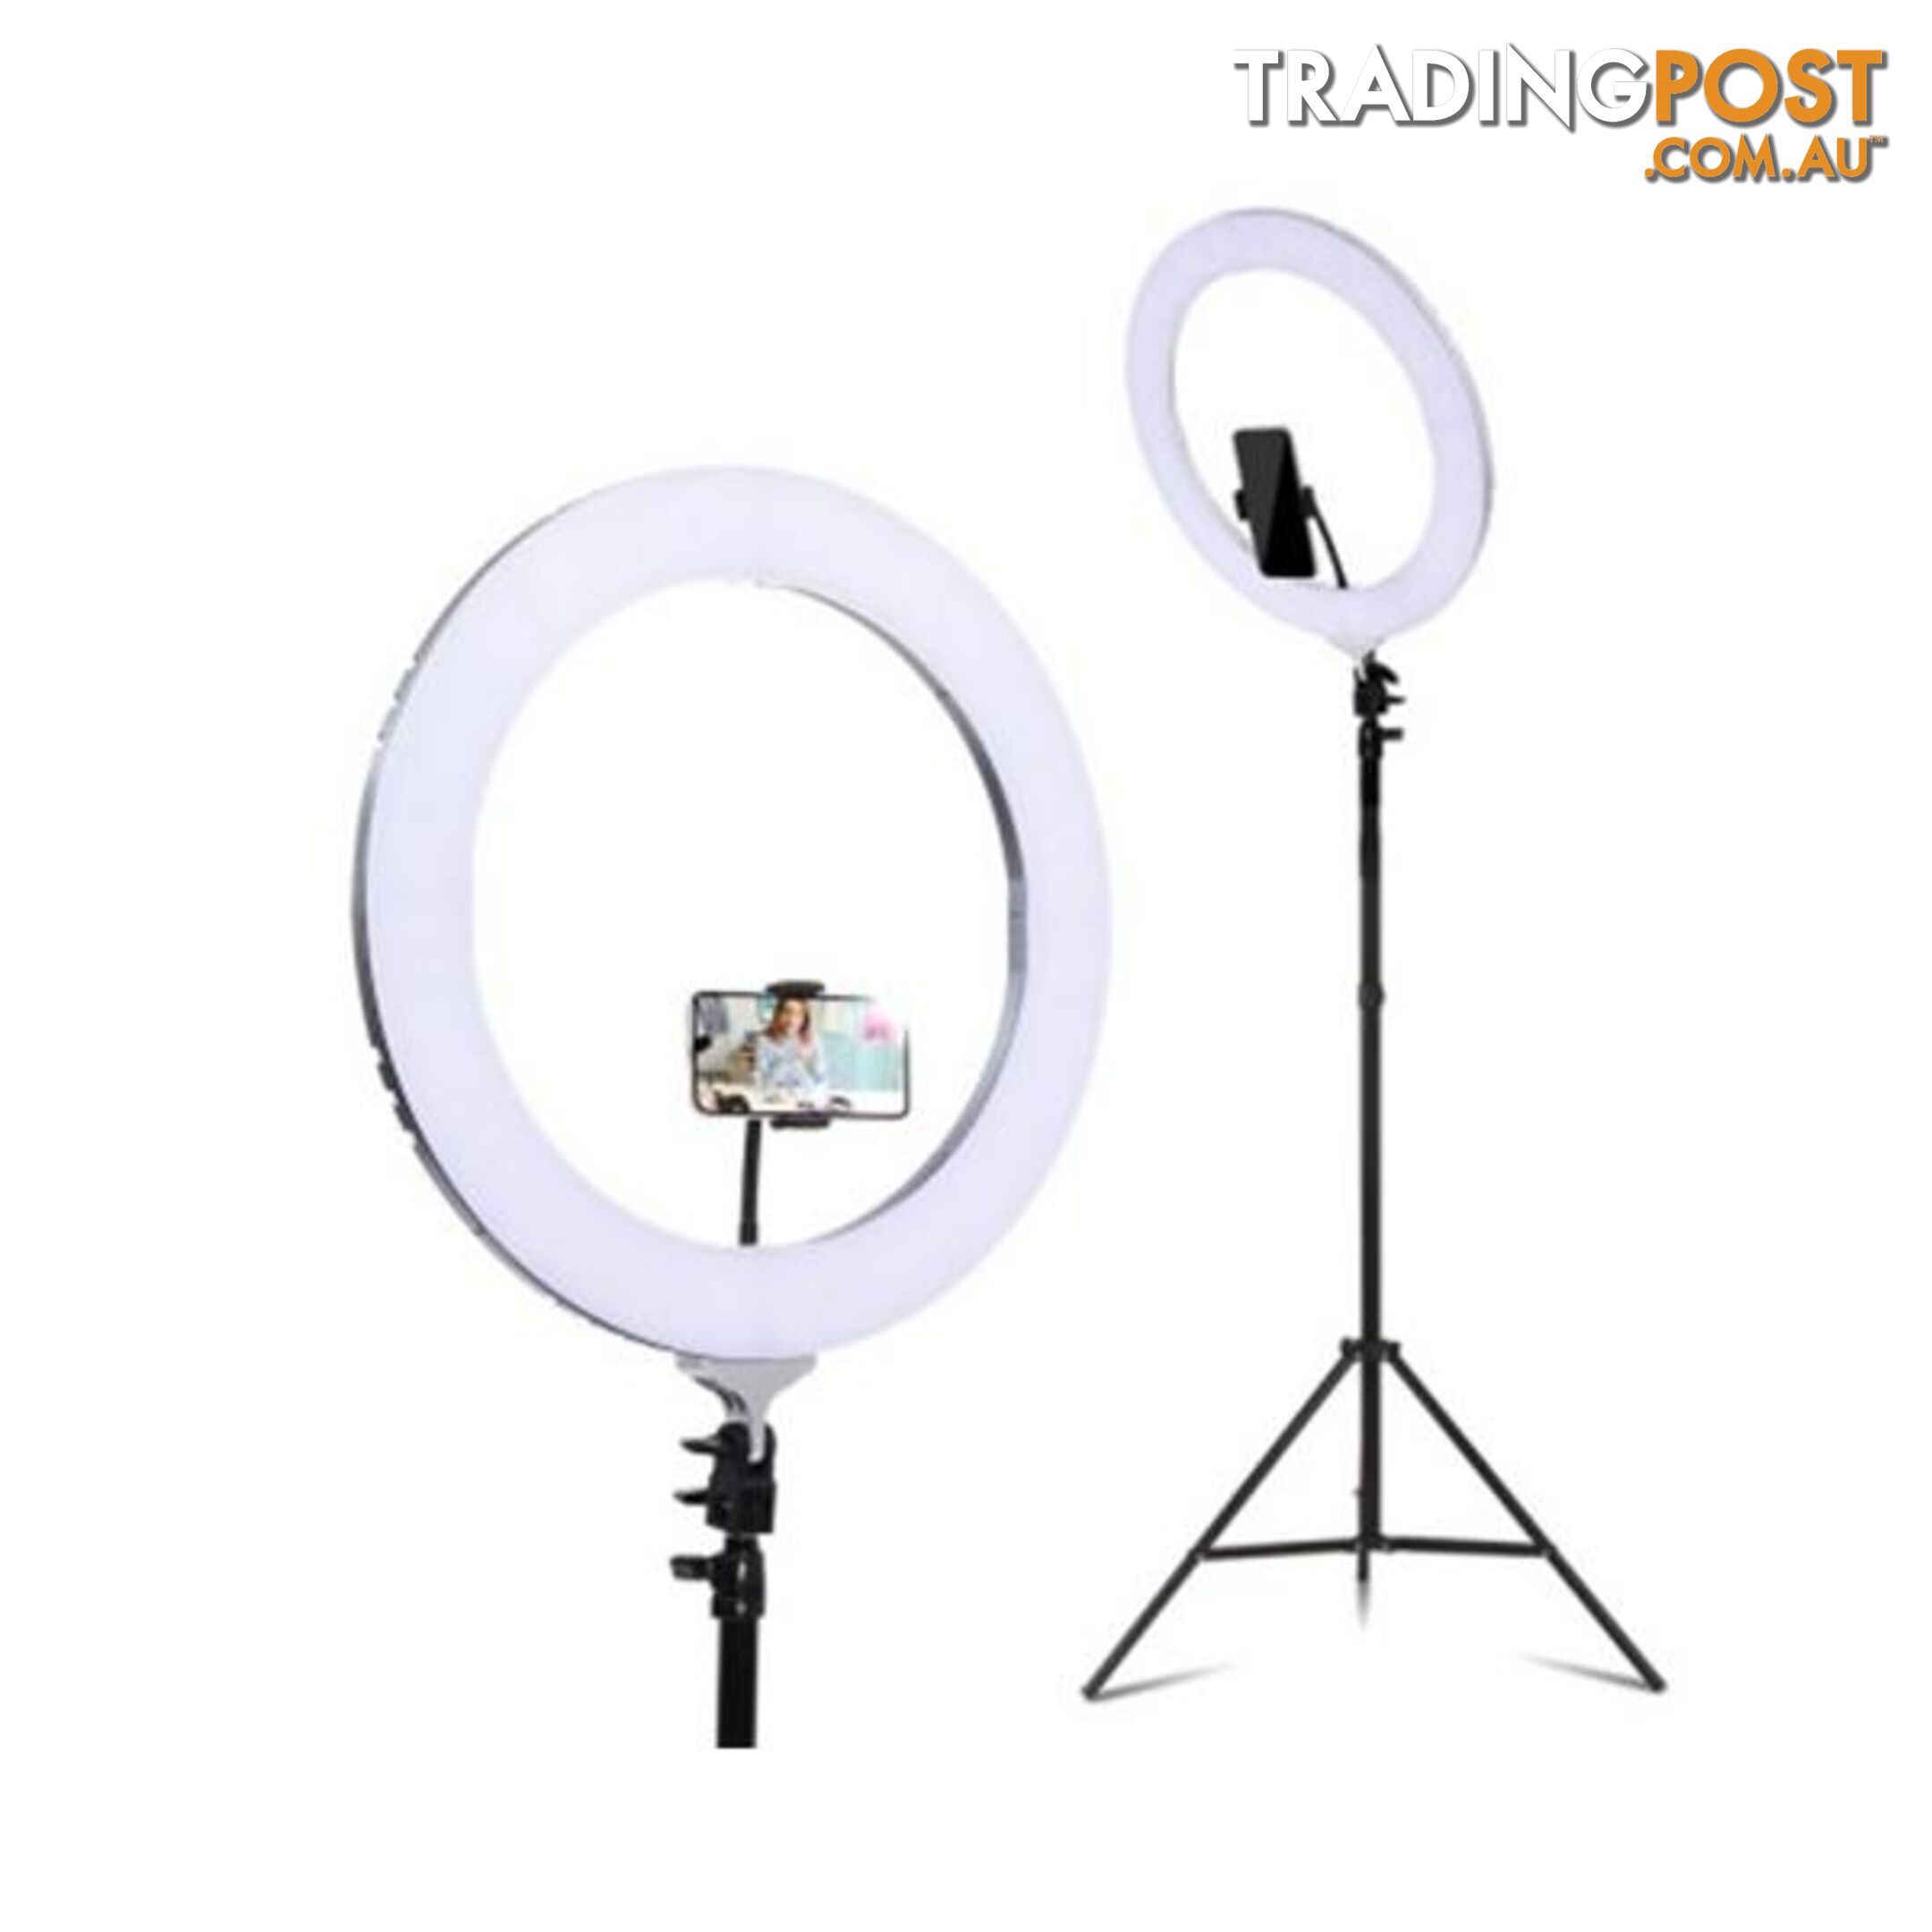 19 Inch Led Ring Light 6500K 5800Lm Dimmable Diva Stand Make Up Studio - Unbranded - 9350062182390